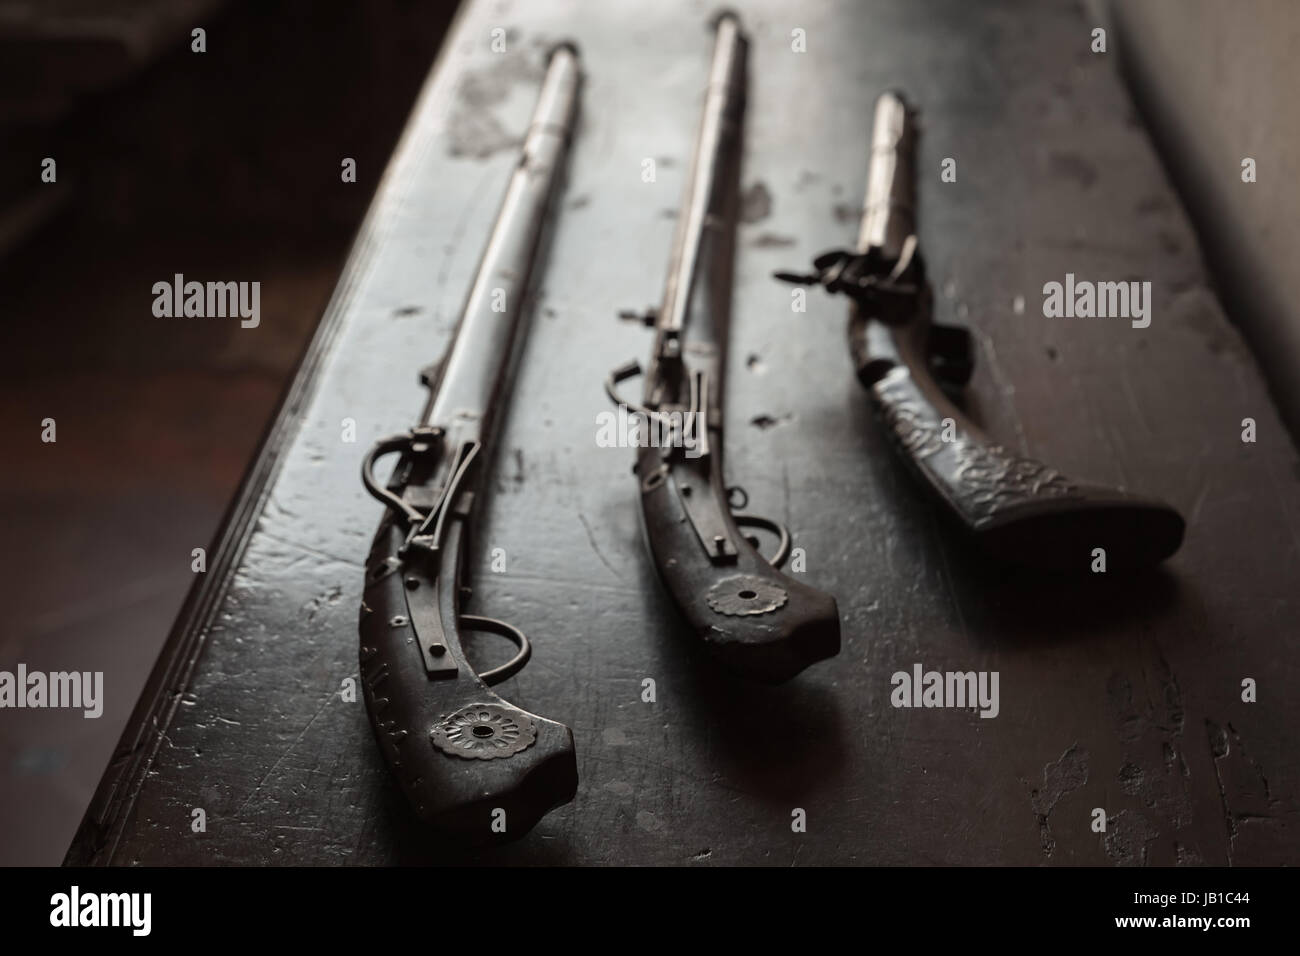 Three ancient guns lay on dark wooden table, closeup photo with selective focus Stock Photo